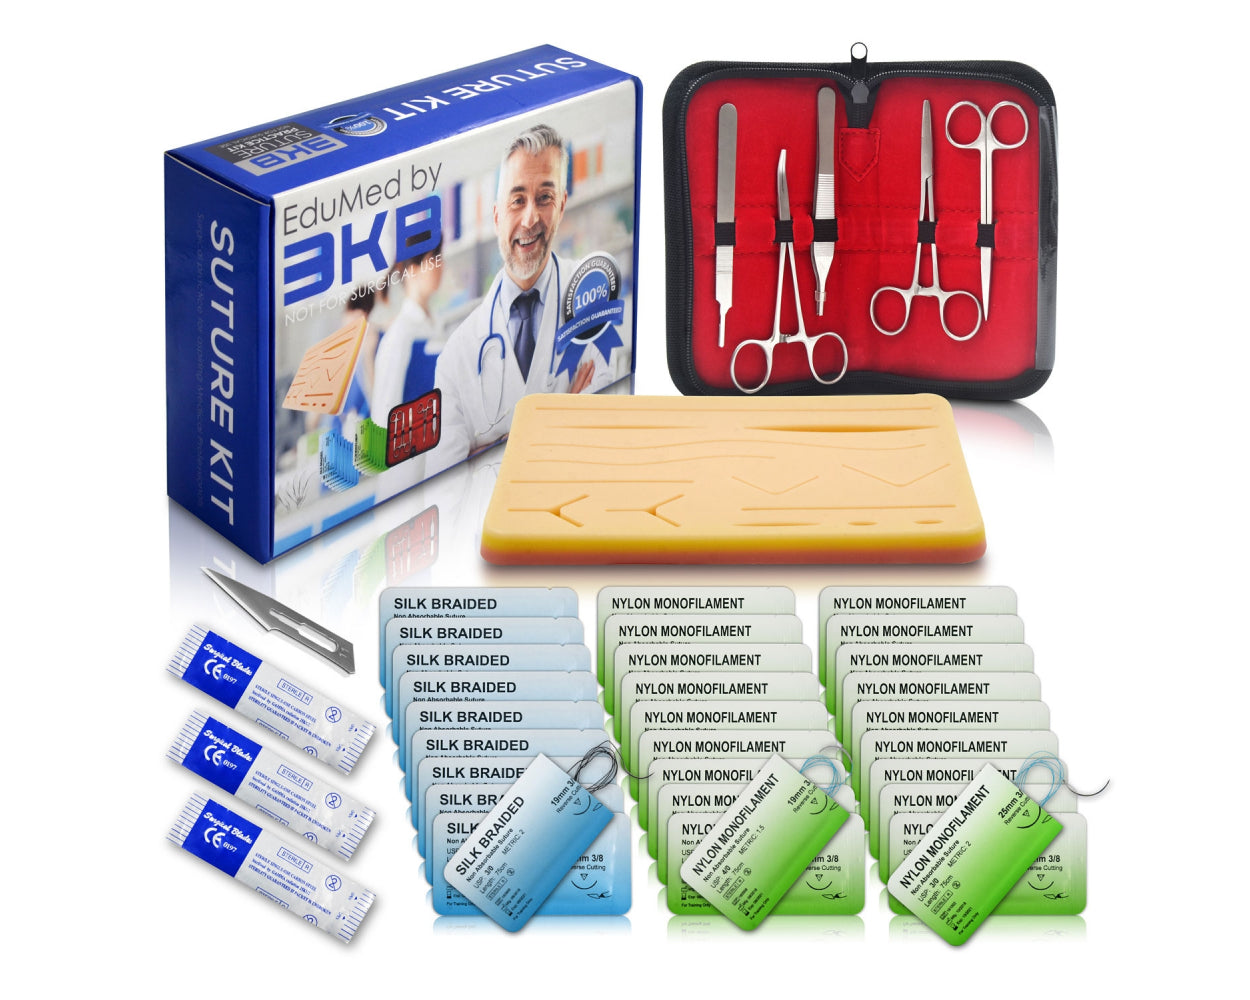 EduMed 41 Piece Practice Suture Kit for Medical and Veterinary Student Training (Demonstration and Education Use Only)